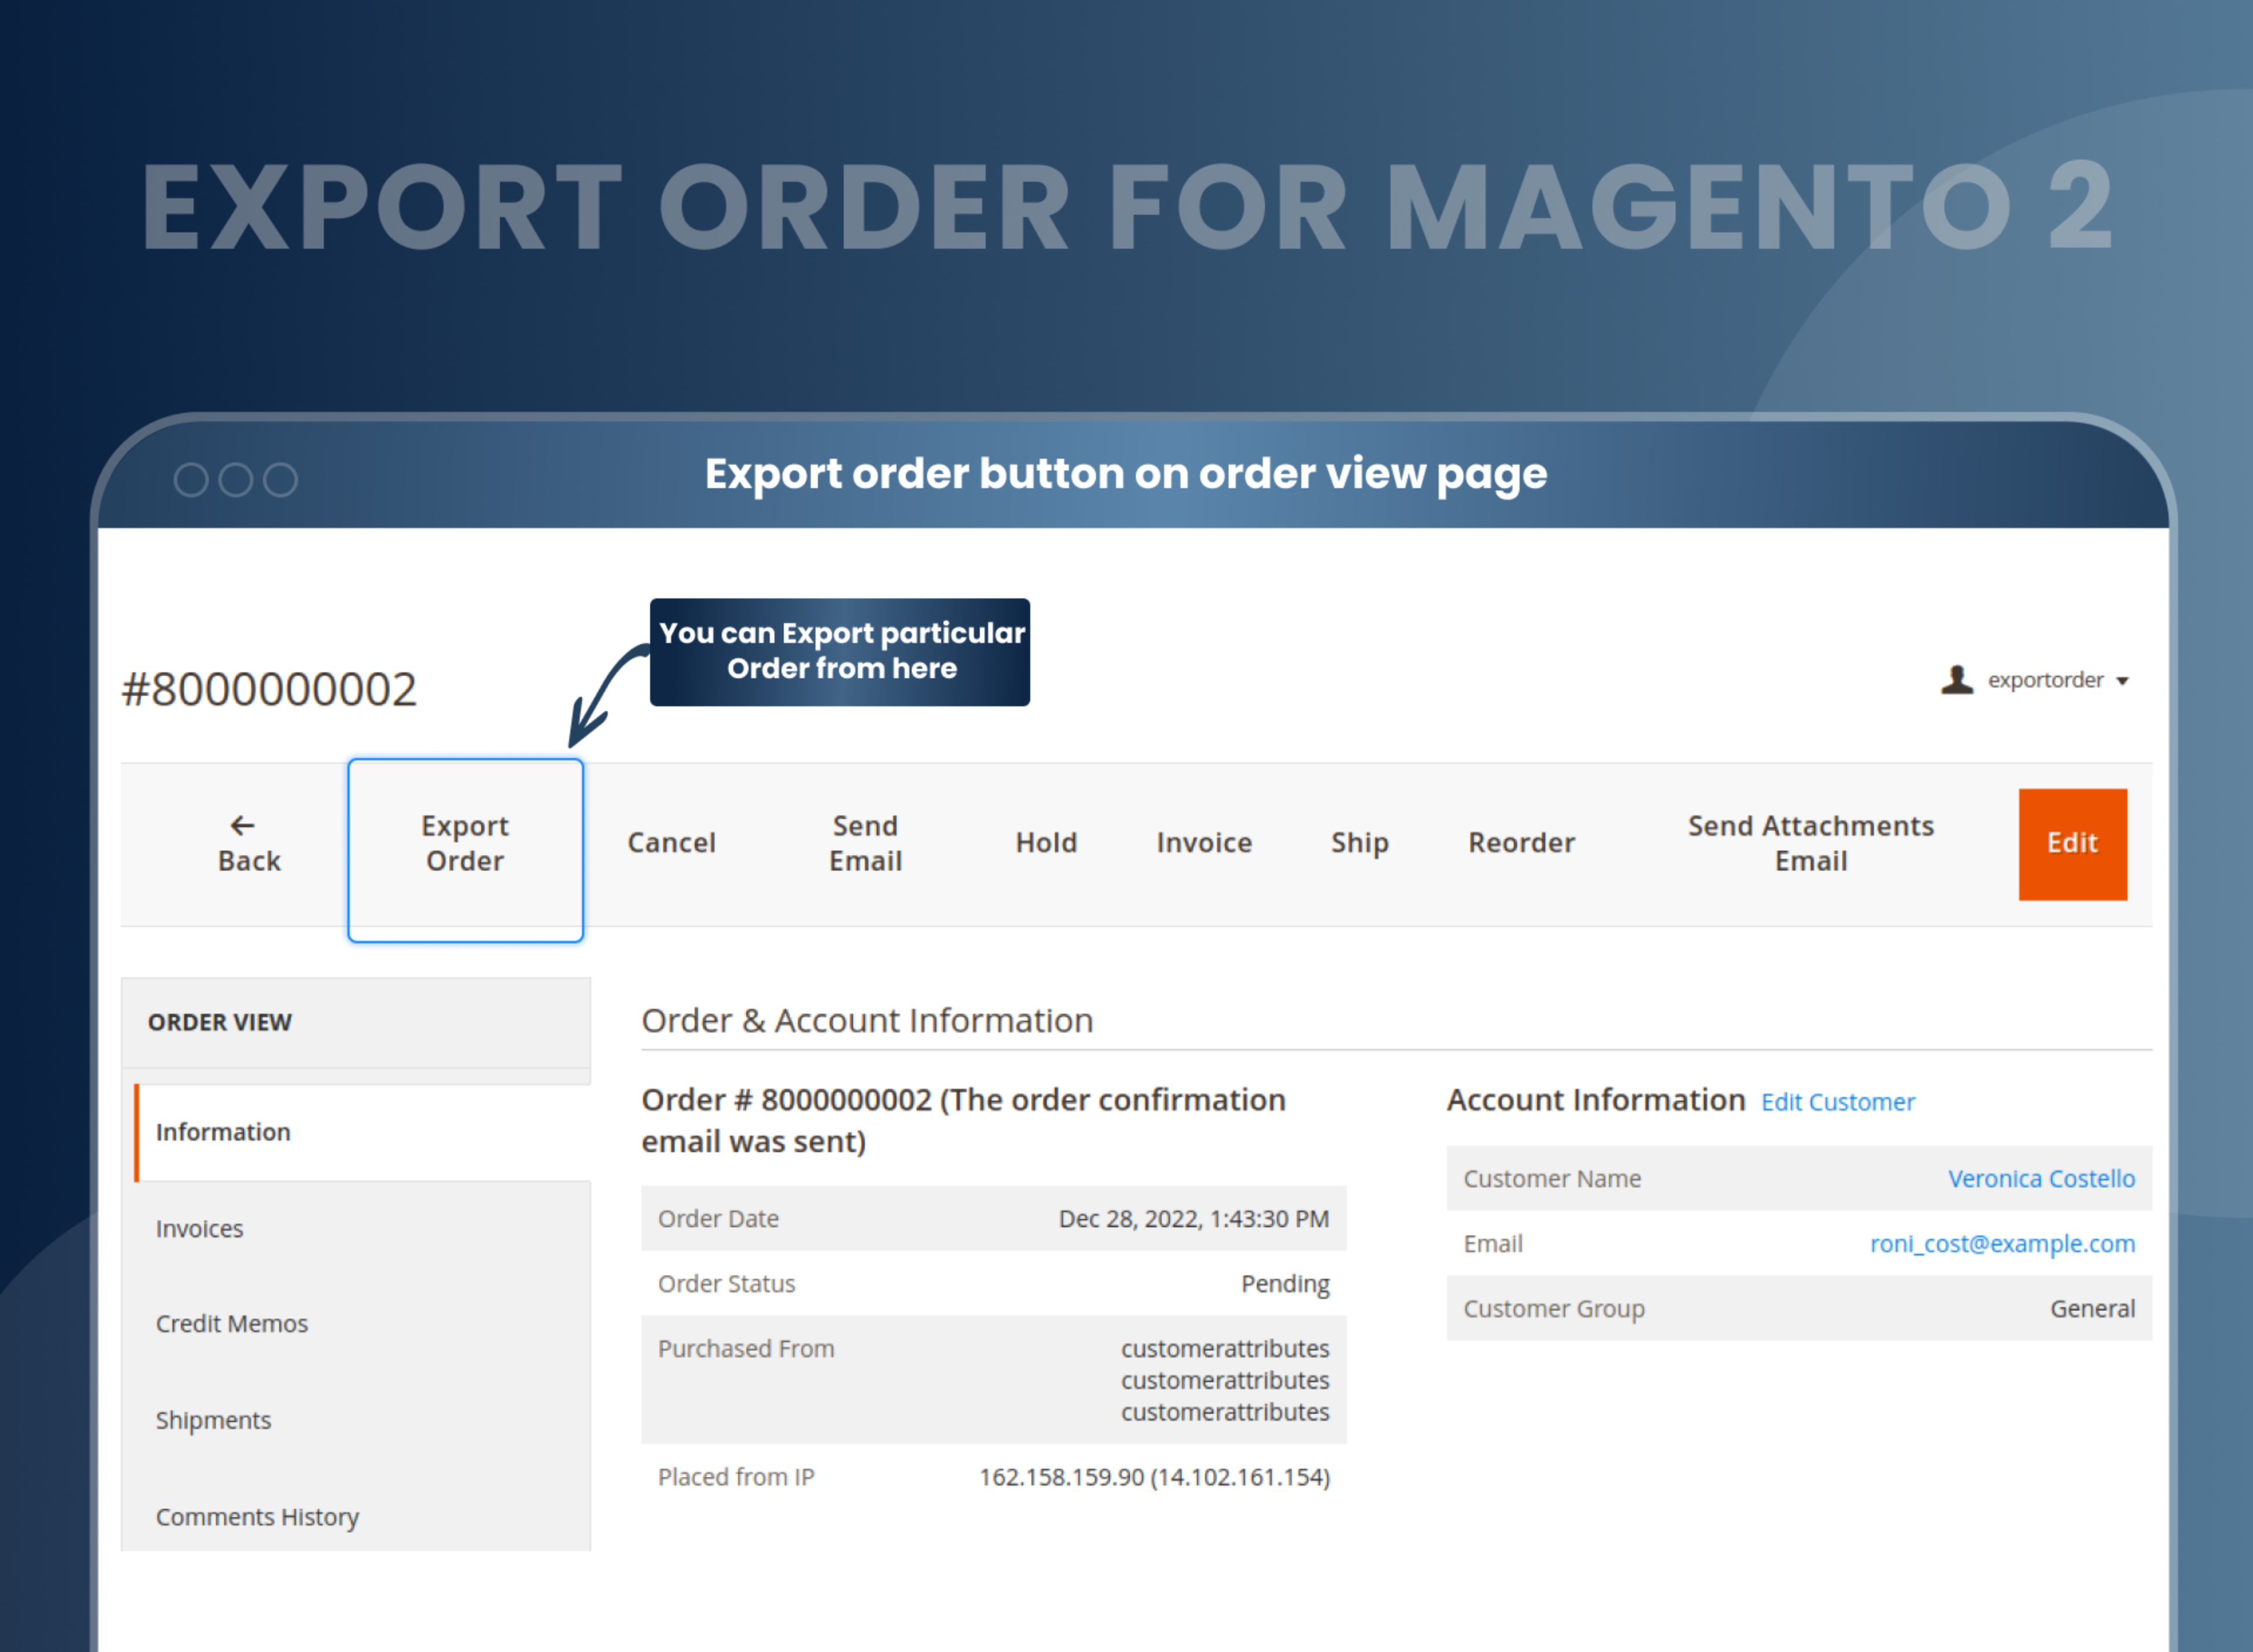 Export order button on order view page